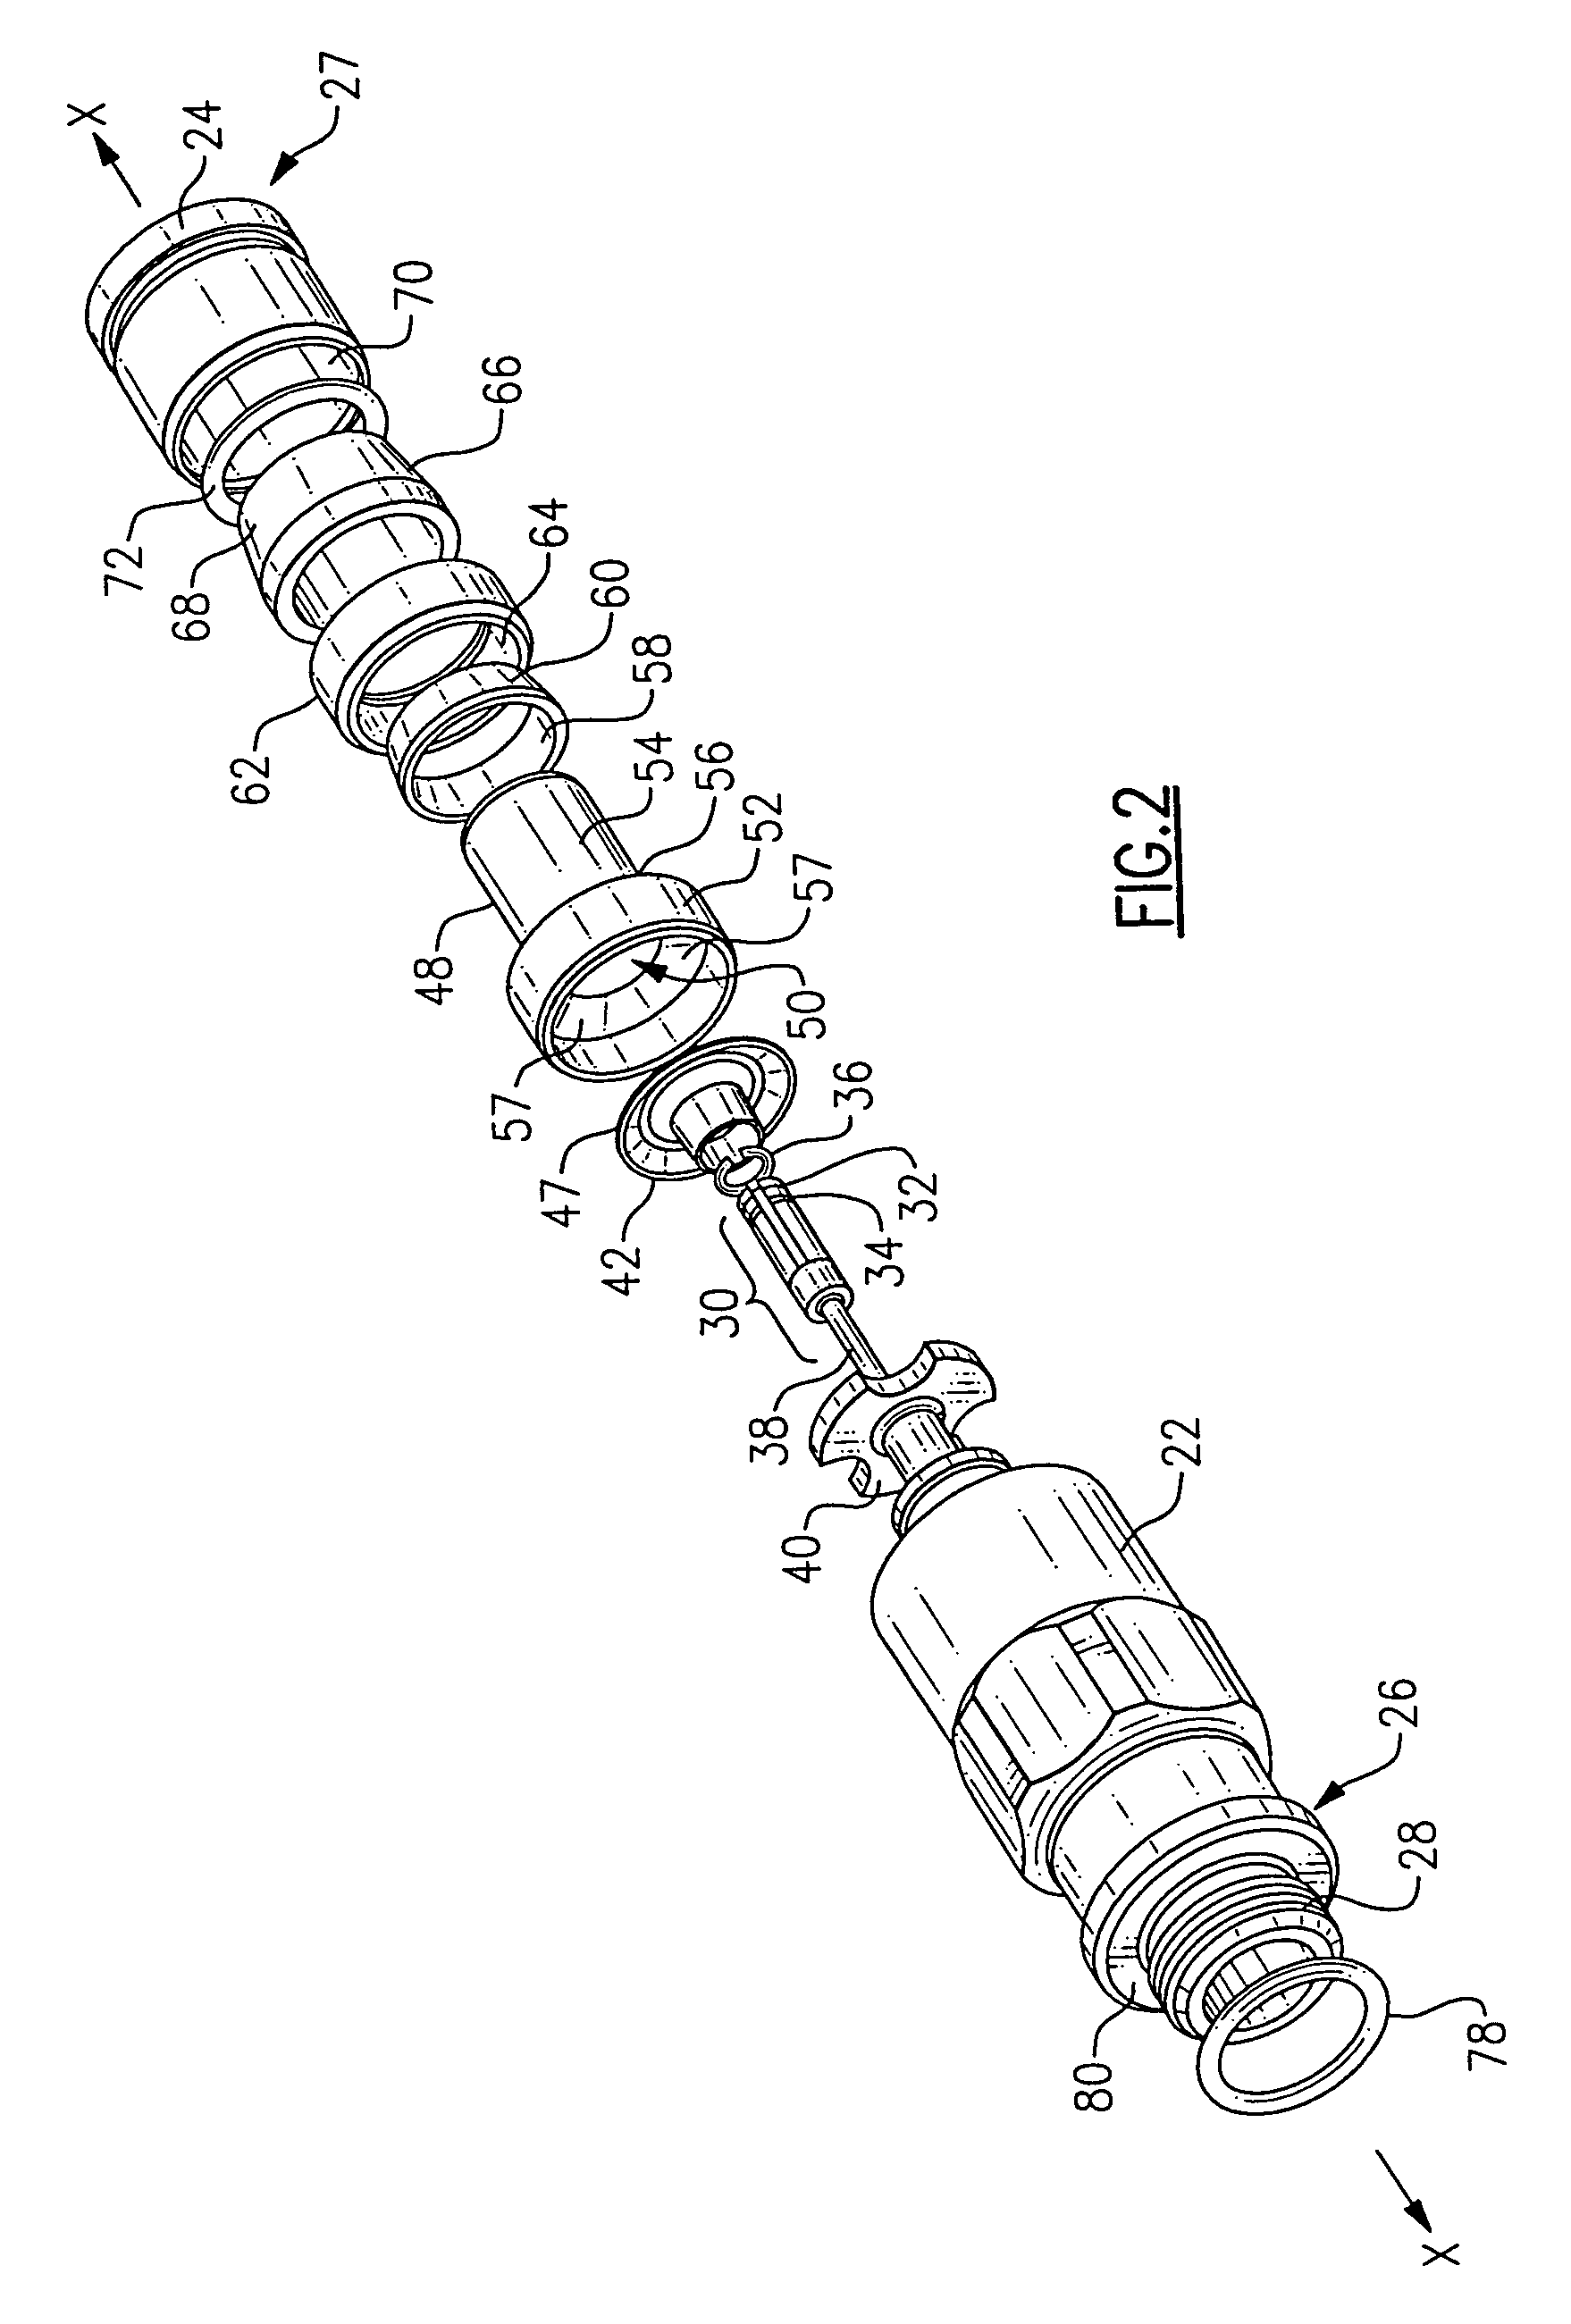 Apparatus for making permanent hardline connection